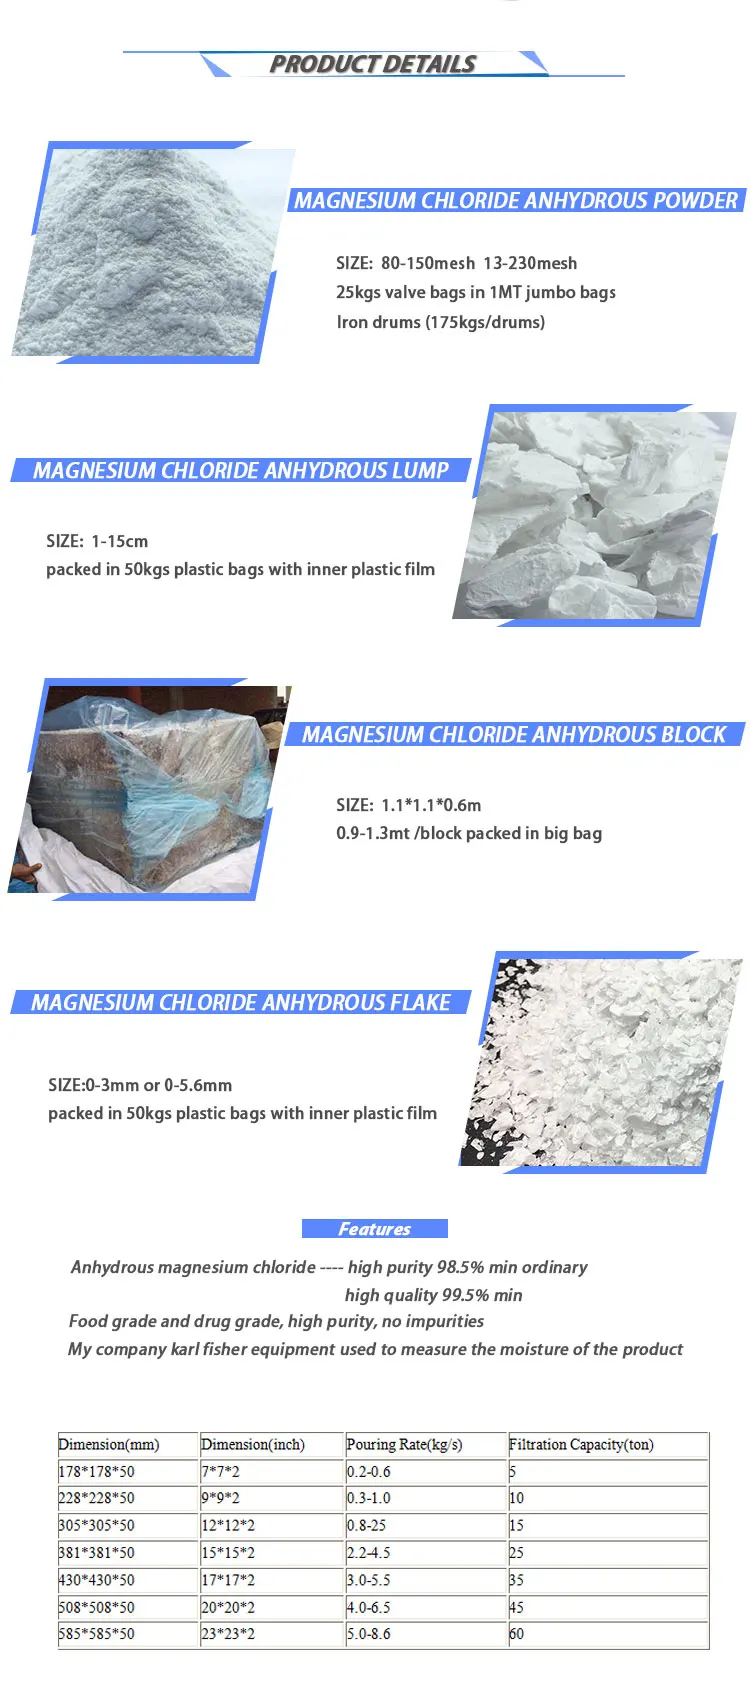 China Industry Grade Magnesium Chloride Anhydrous Block